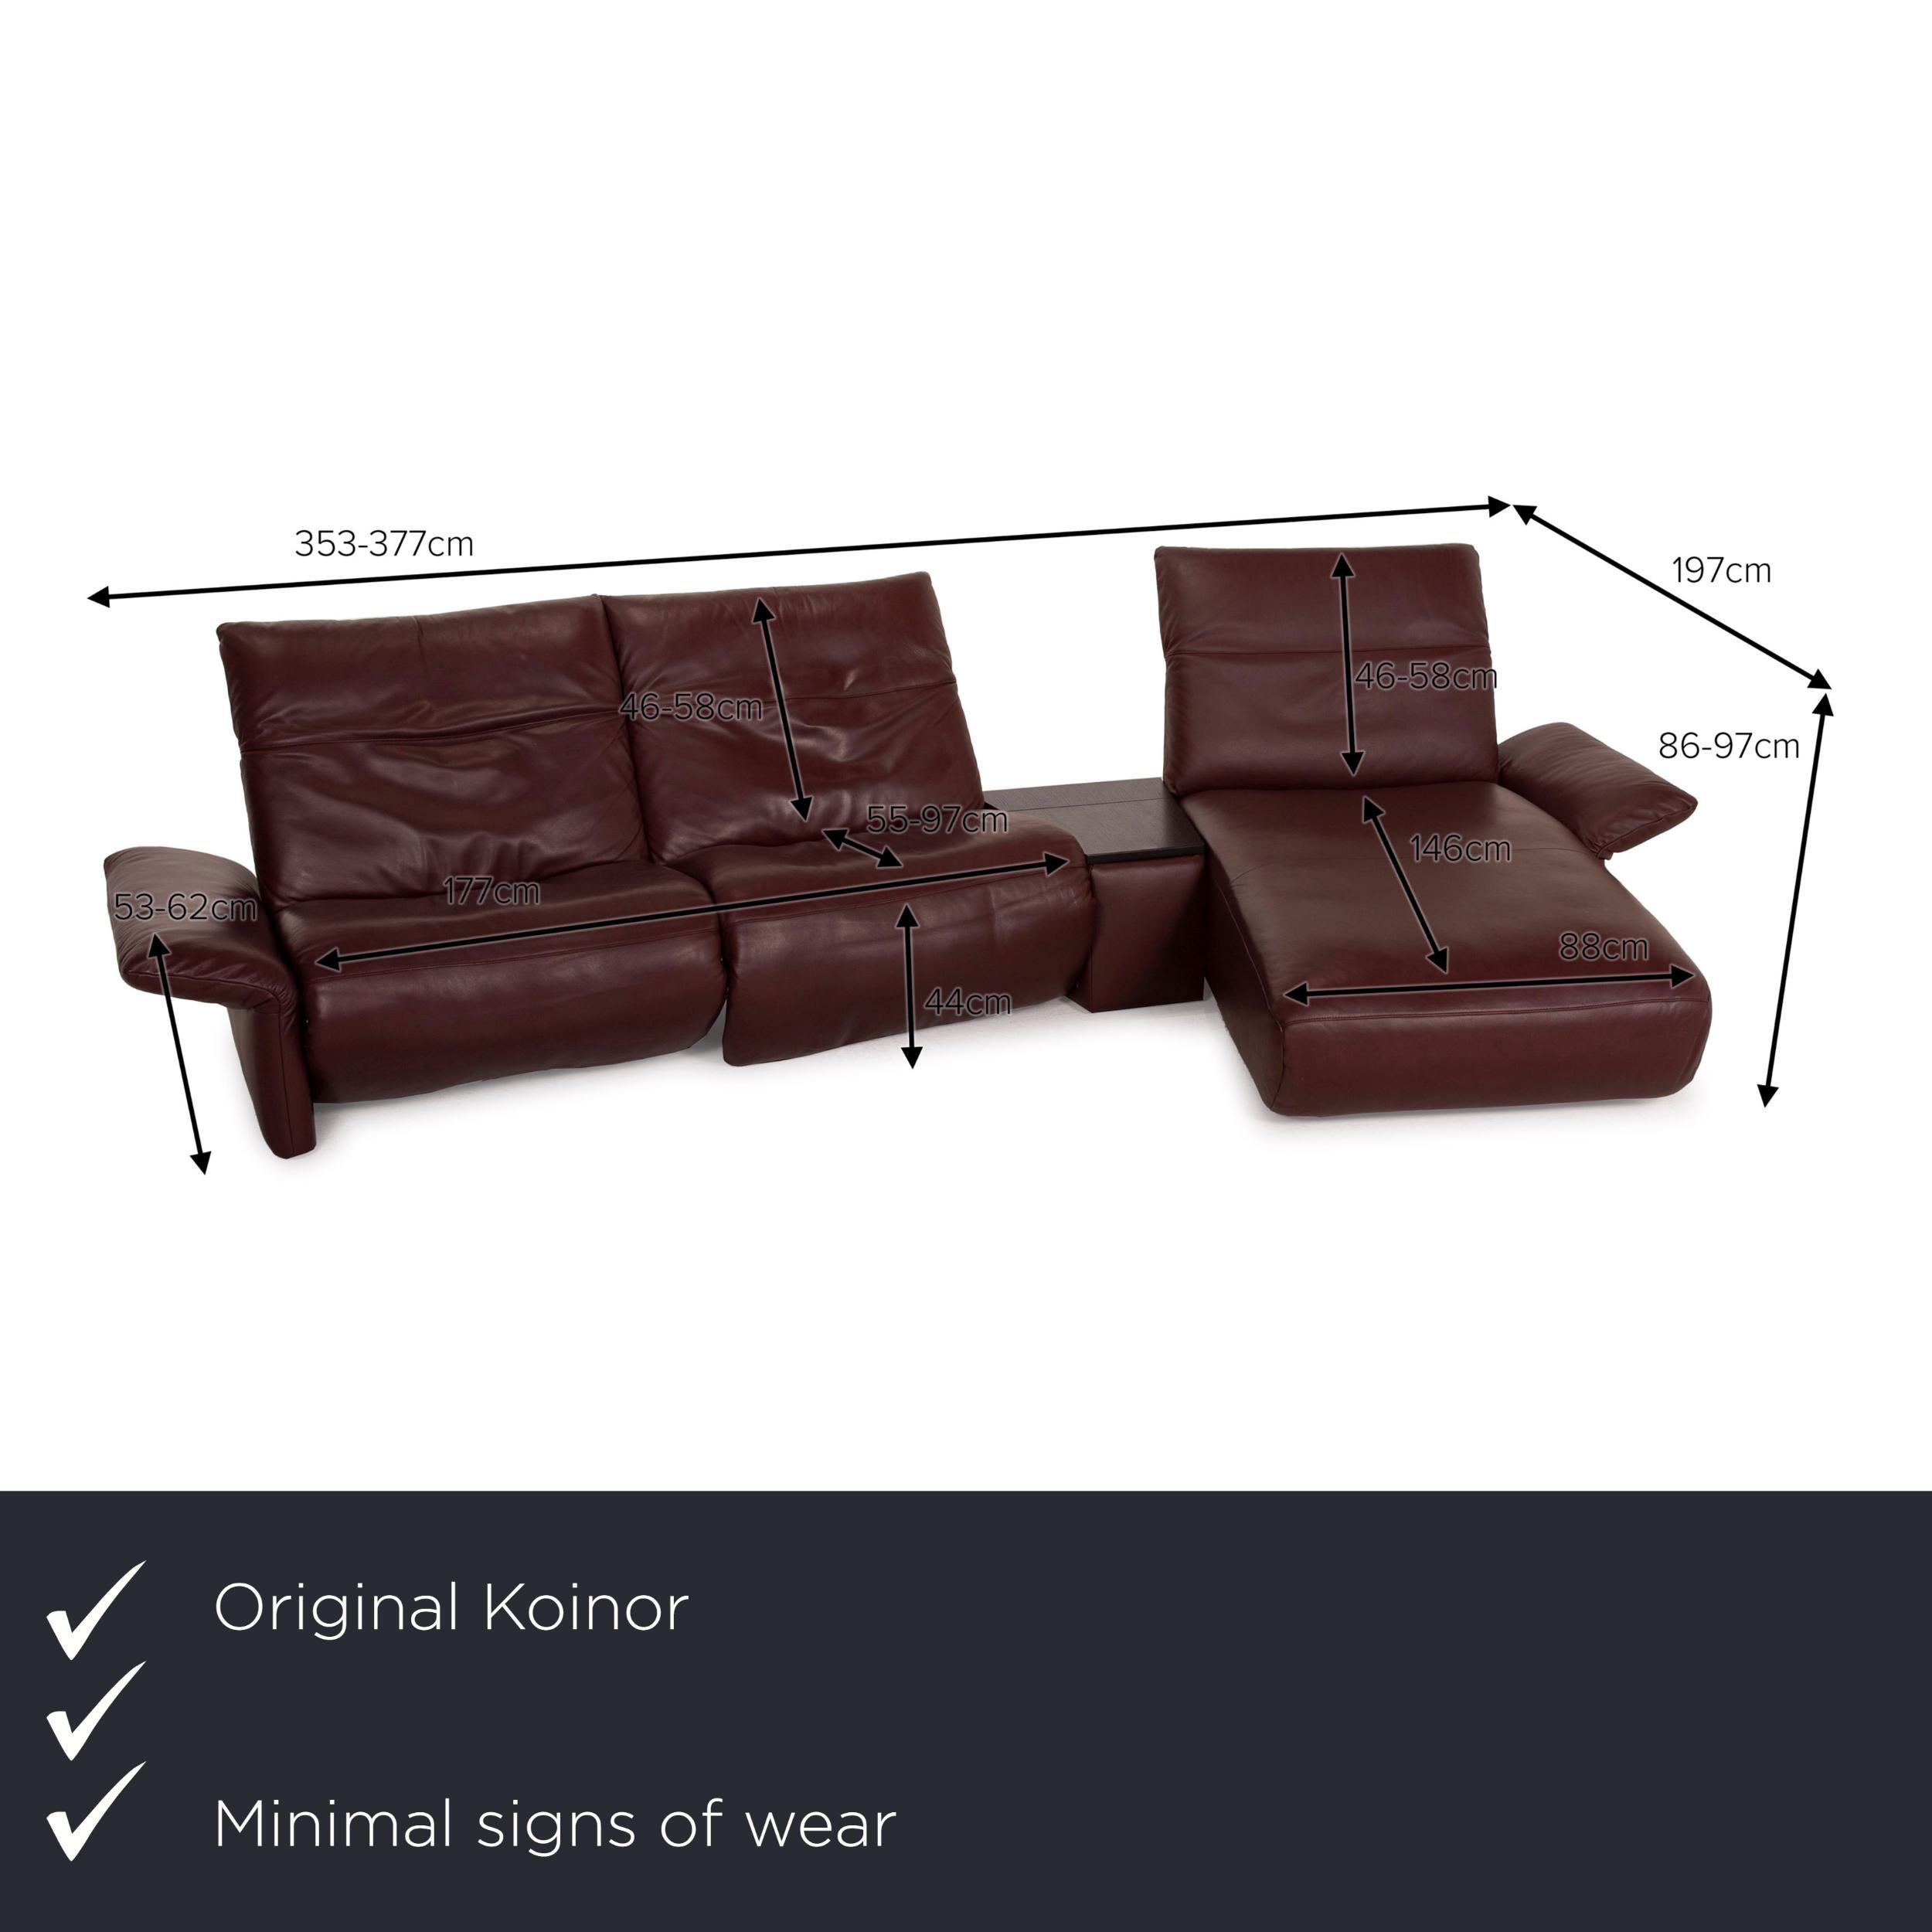 We present to you a Koinor Elena leather sofa brown corner sofa red dark brown function.
  
 

 Product measurements in centimeters:
 

 depth: 105
 width: 377
 height: 86
 seat height: 44
 rest height: 53
 seat depth: 55
 seat width: